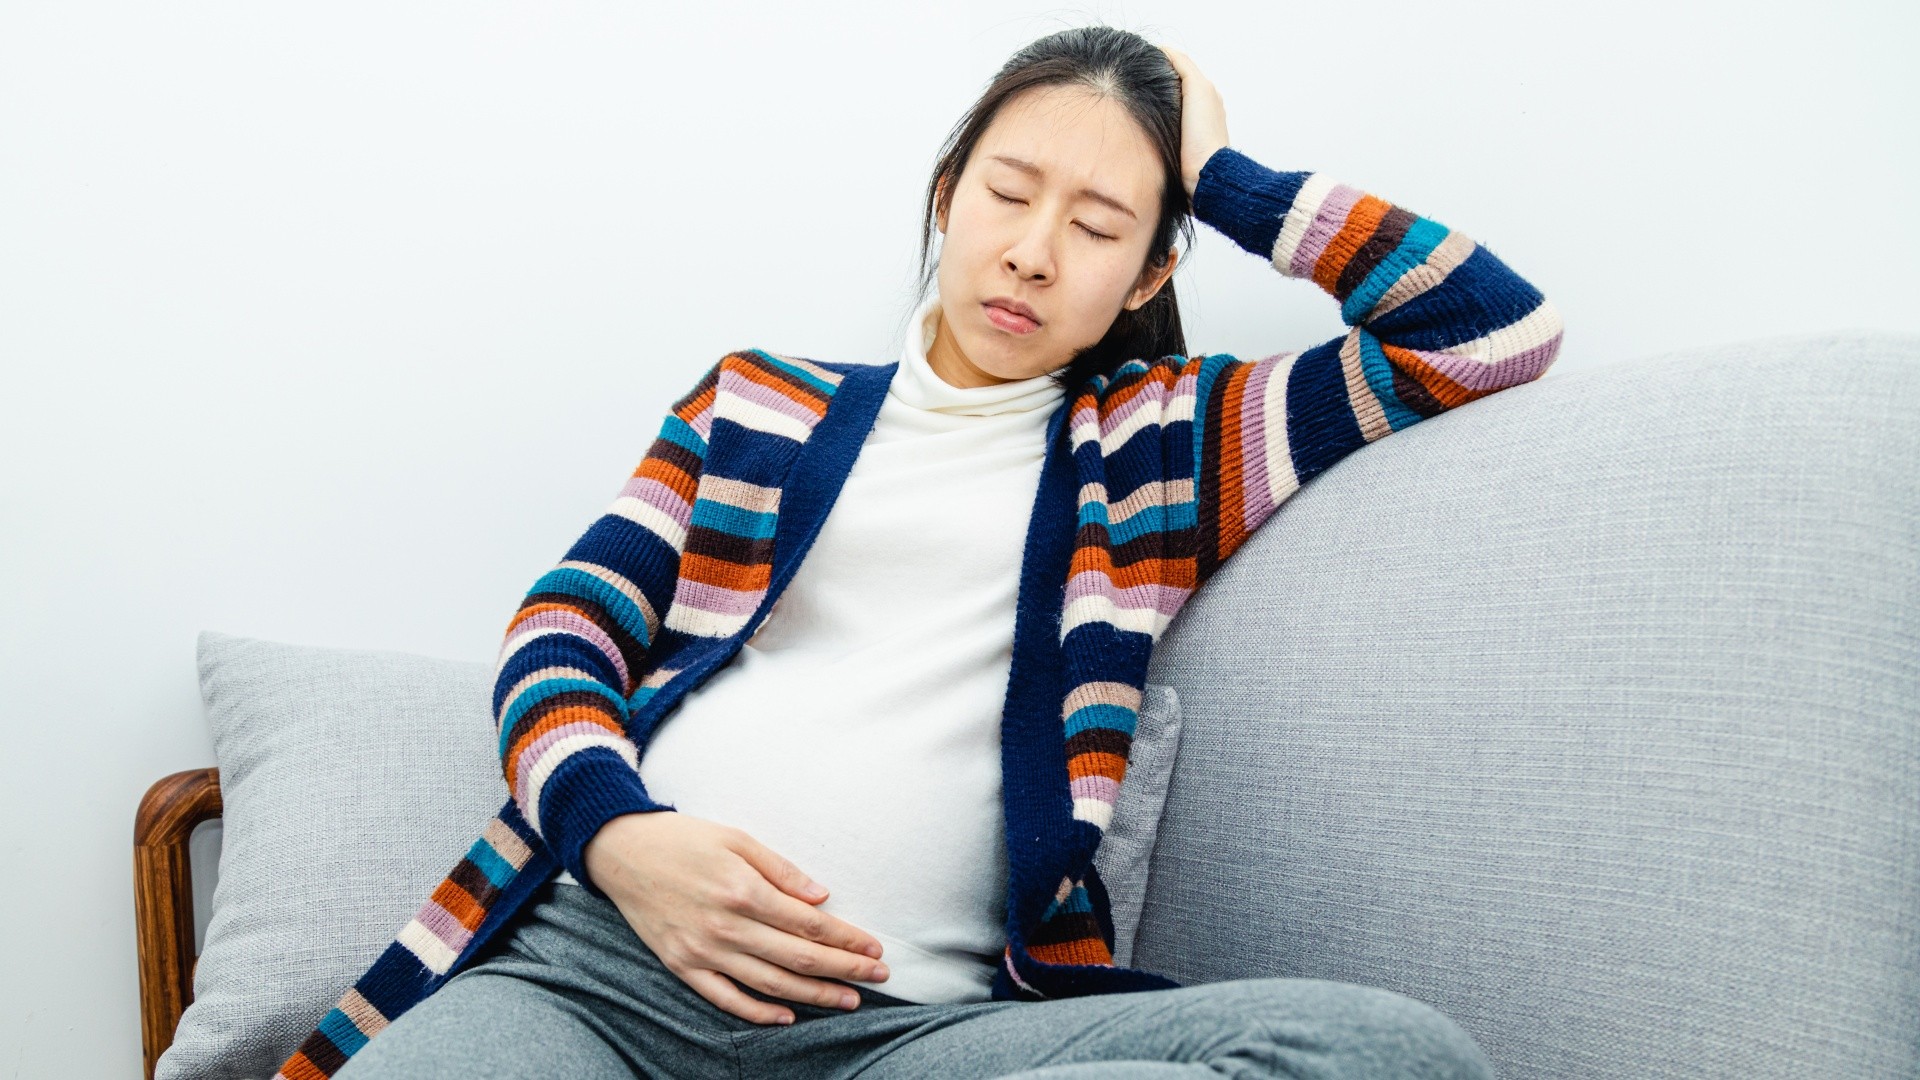 Morning sickness mainly caused by one hormone, study funds